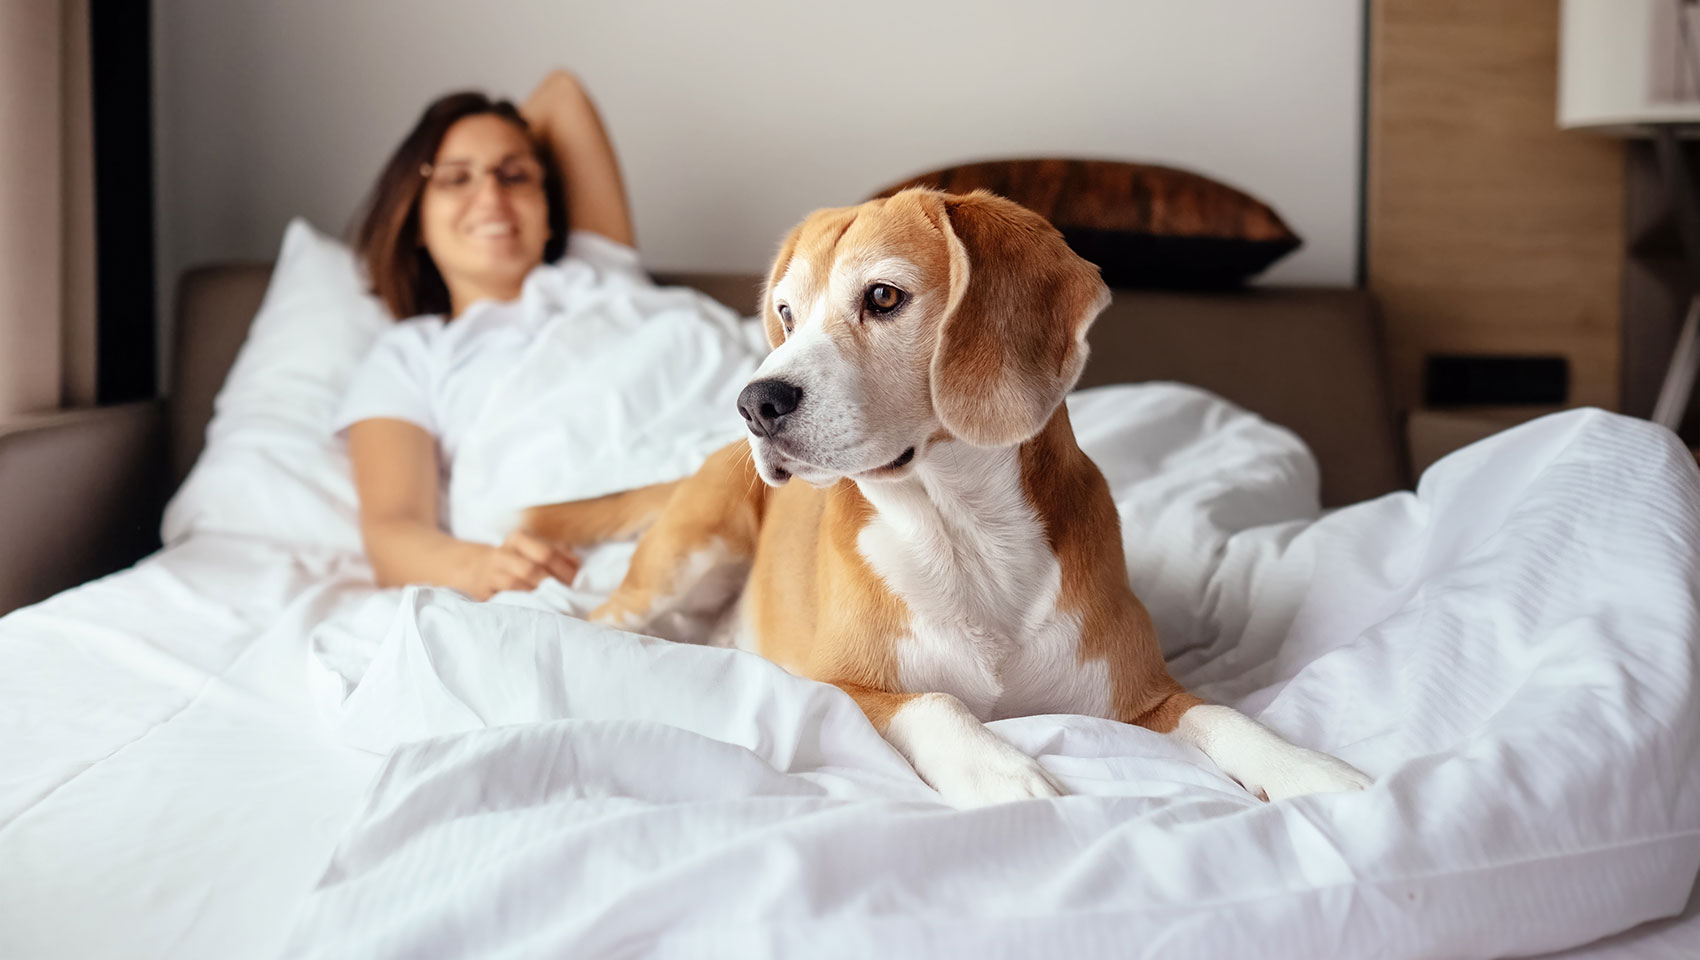 Dog on bed with woman